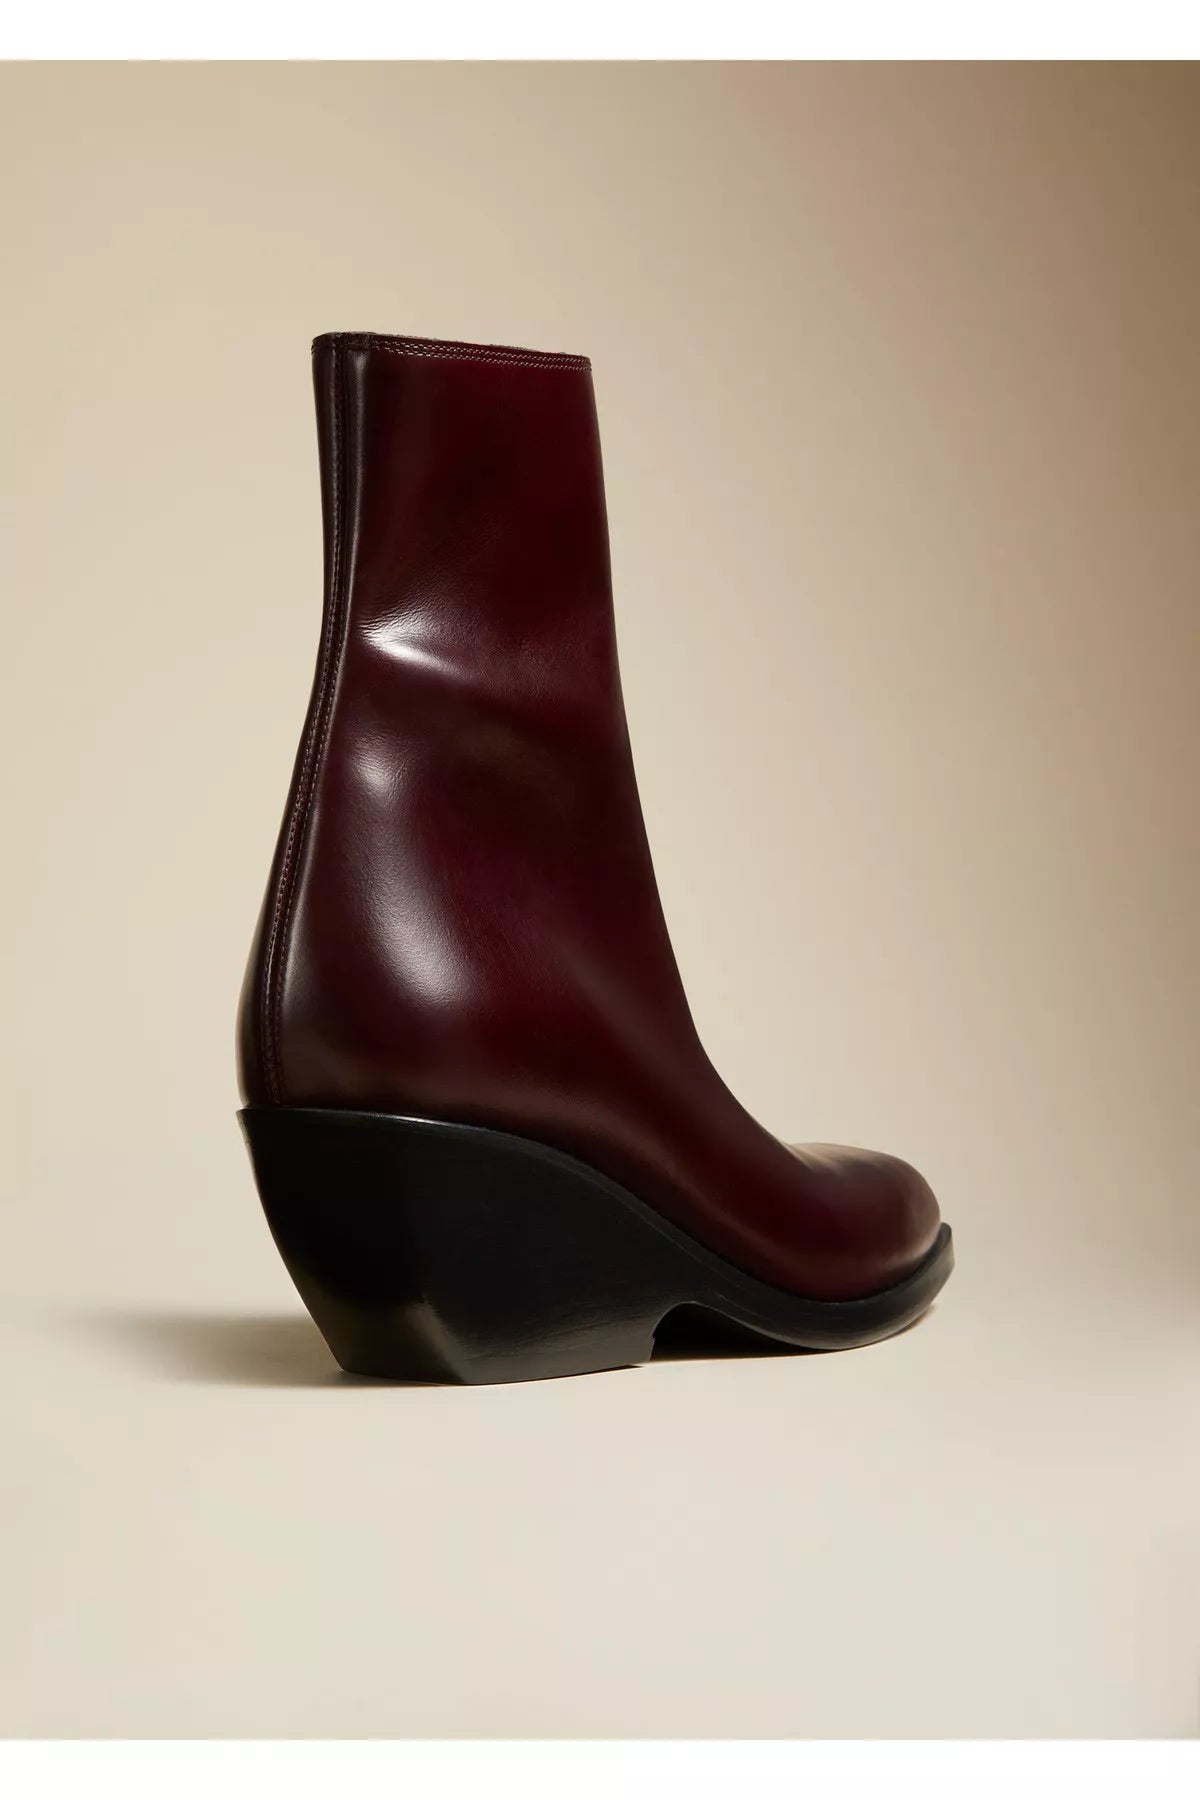 Hooper ankle boot in leather - Deep Wine